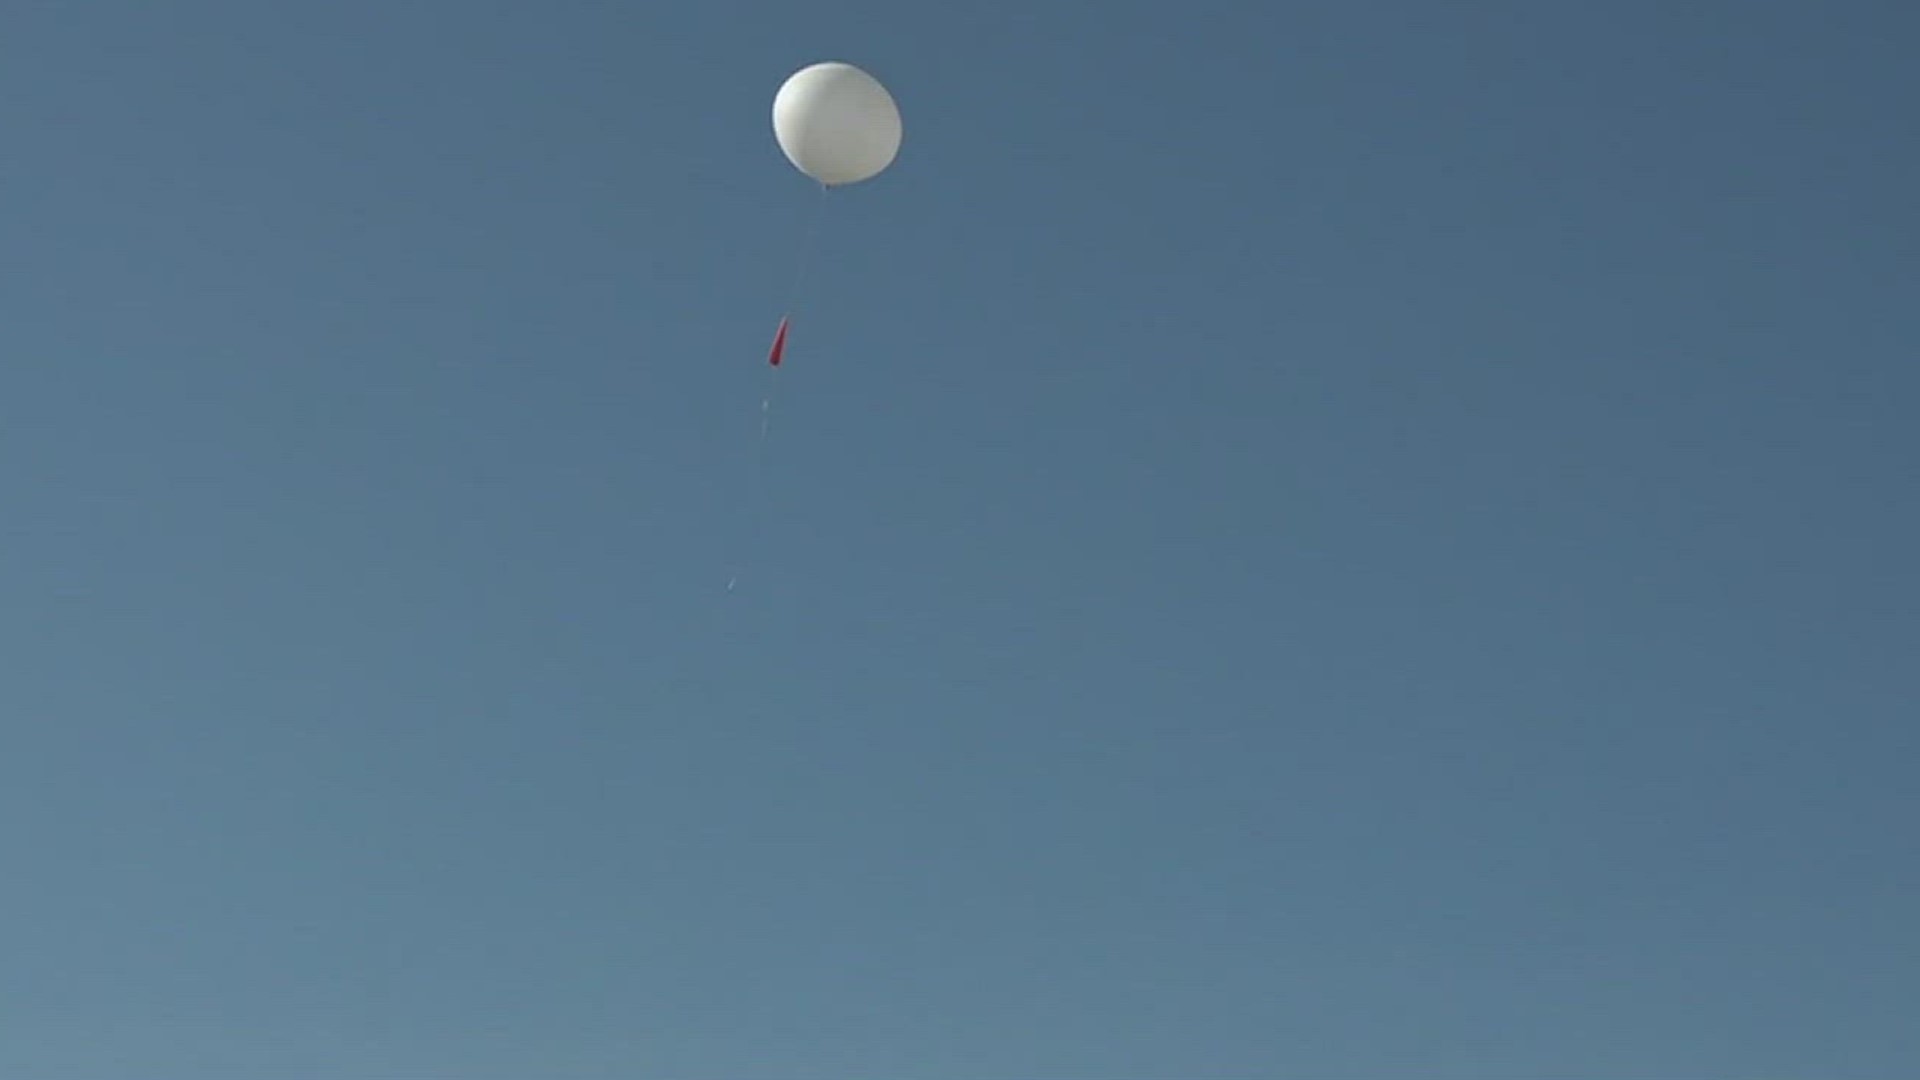 3NEWS talked to experts to see exactly how the weather balloons help monitor weather.